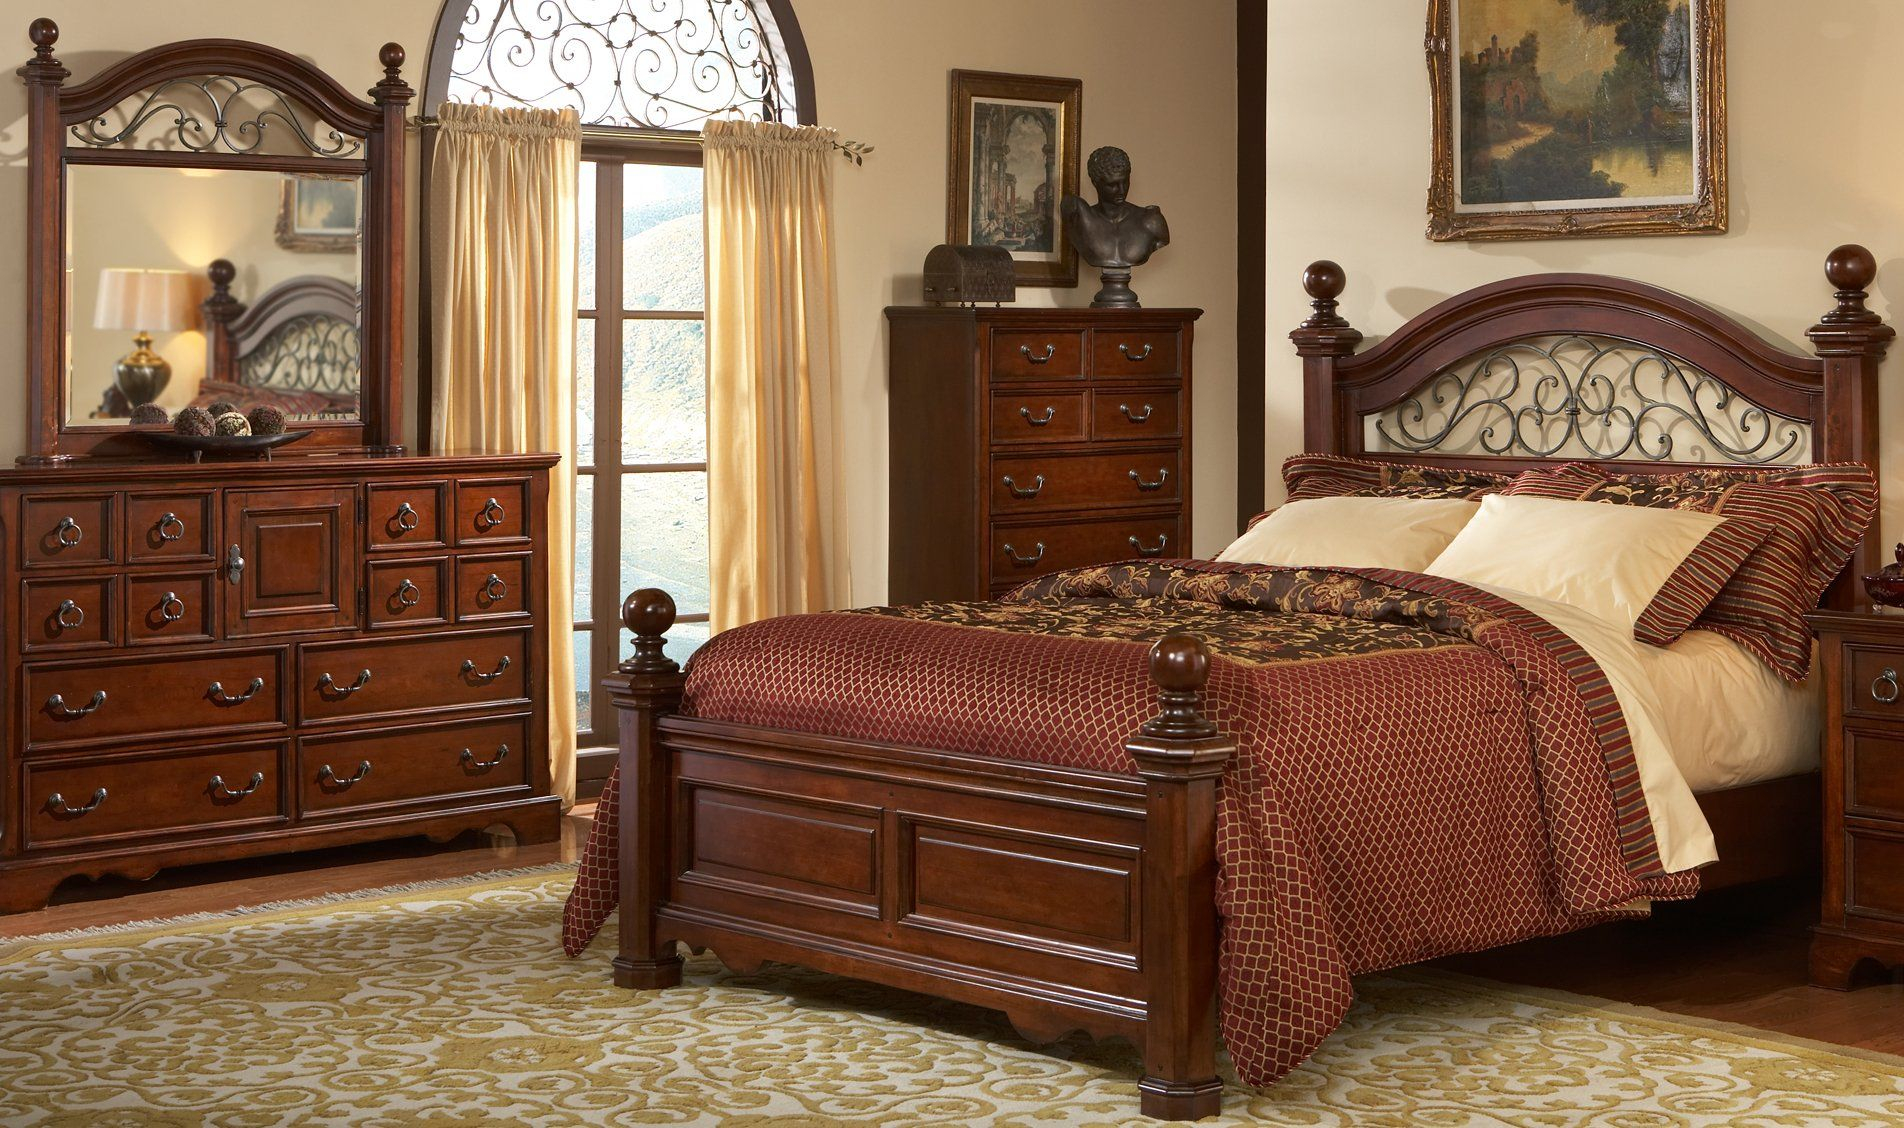 Wrought Iron And Wood Bedroom Sets Bedroom Set With Wrought pertaining to sizing 1904 X 1128